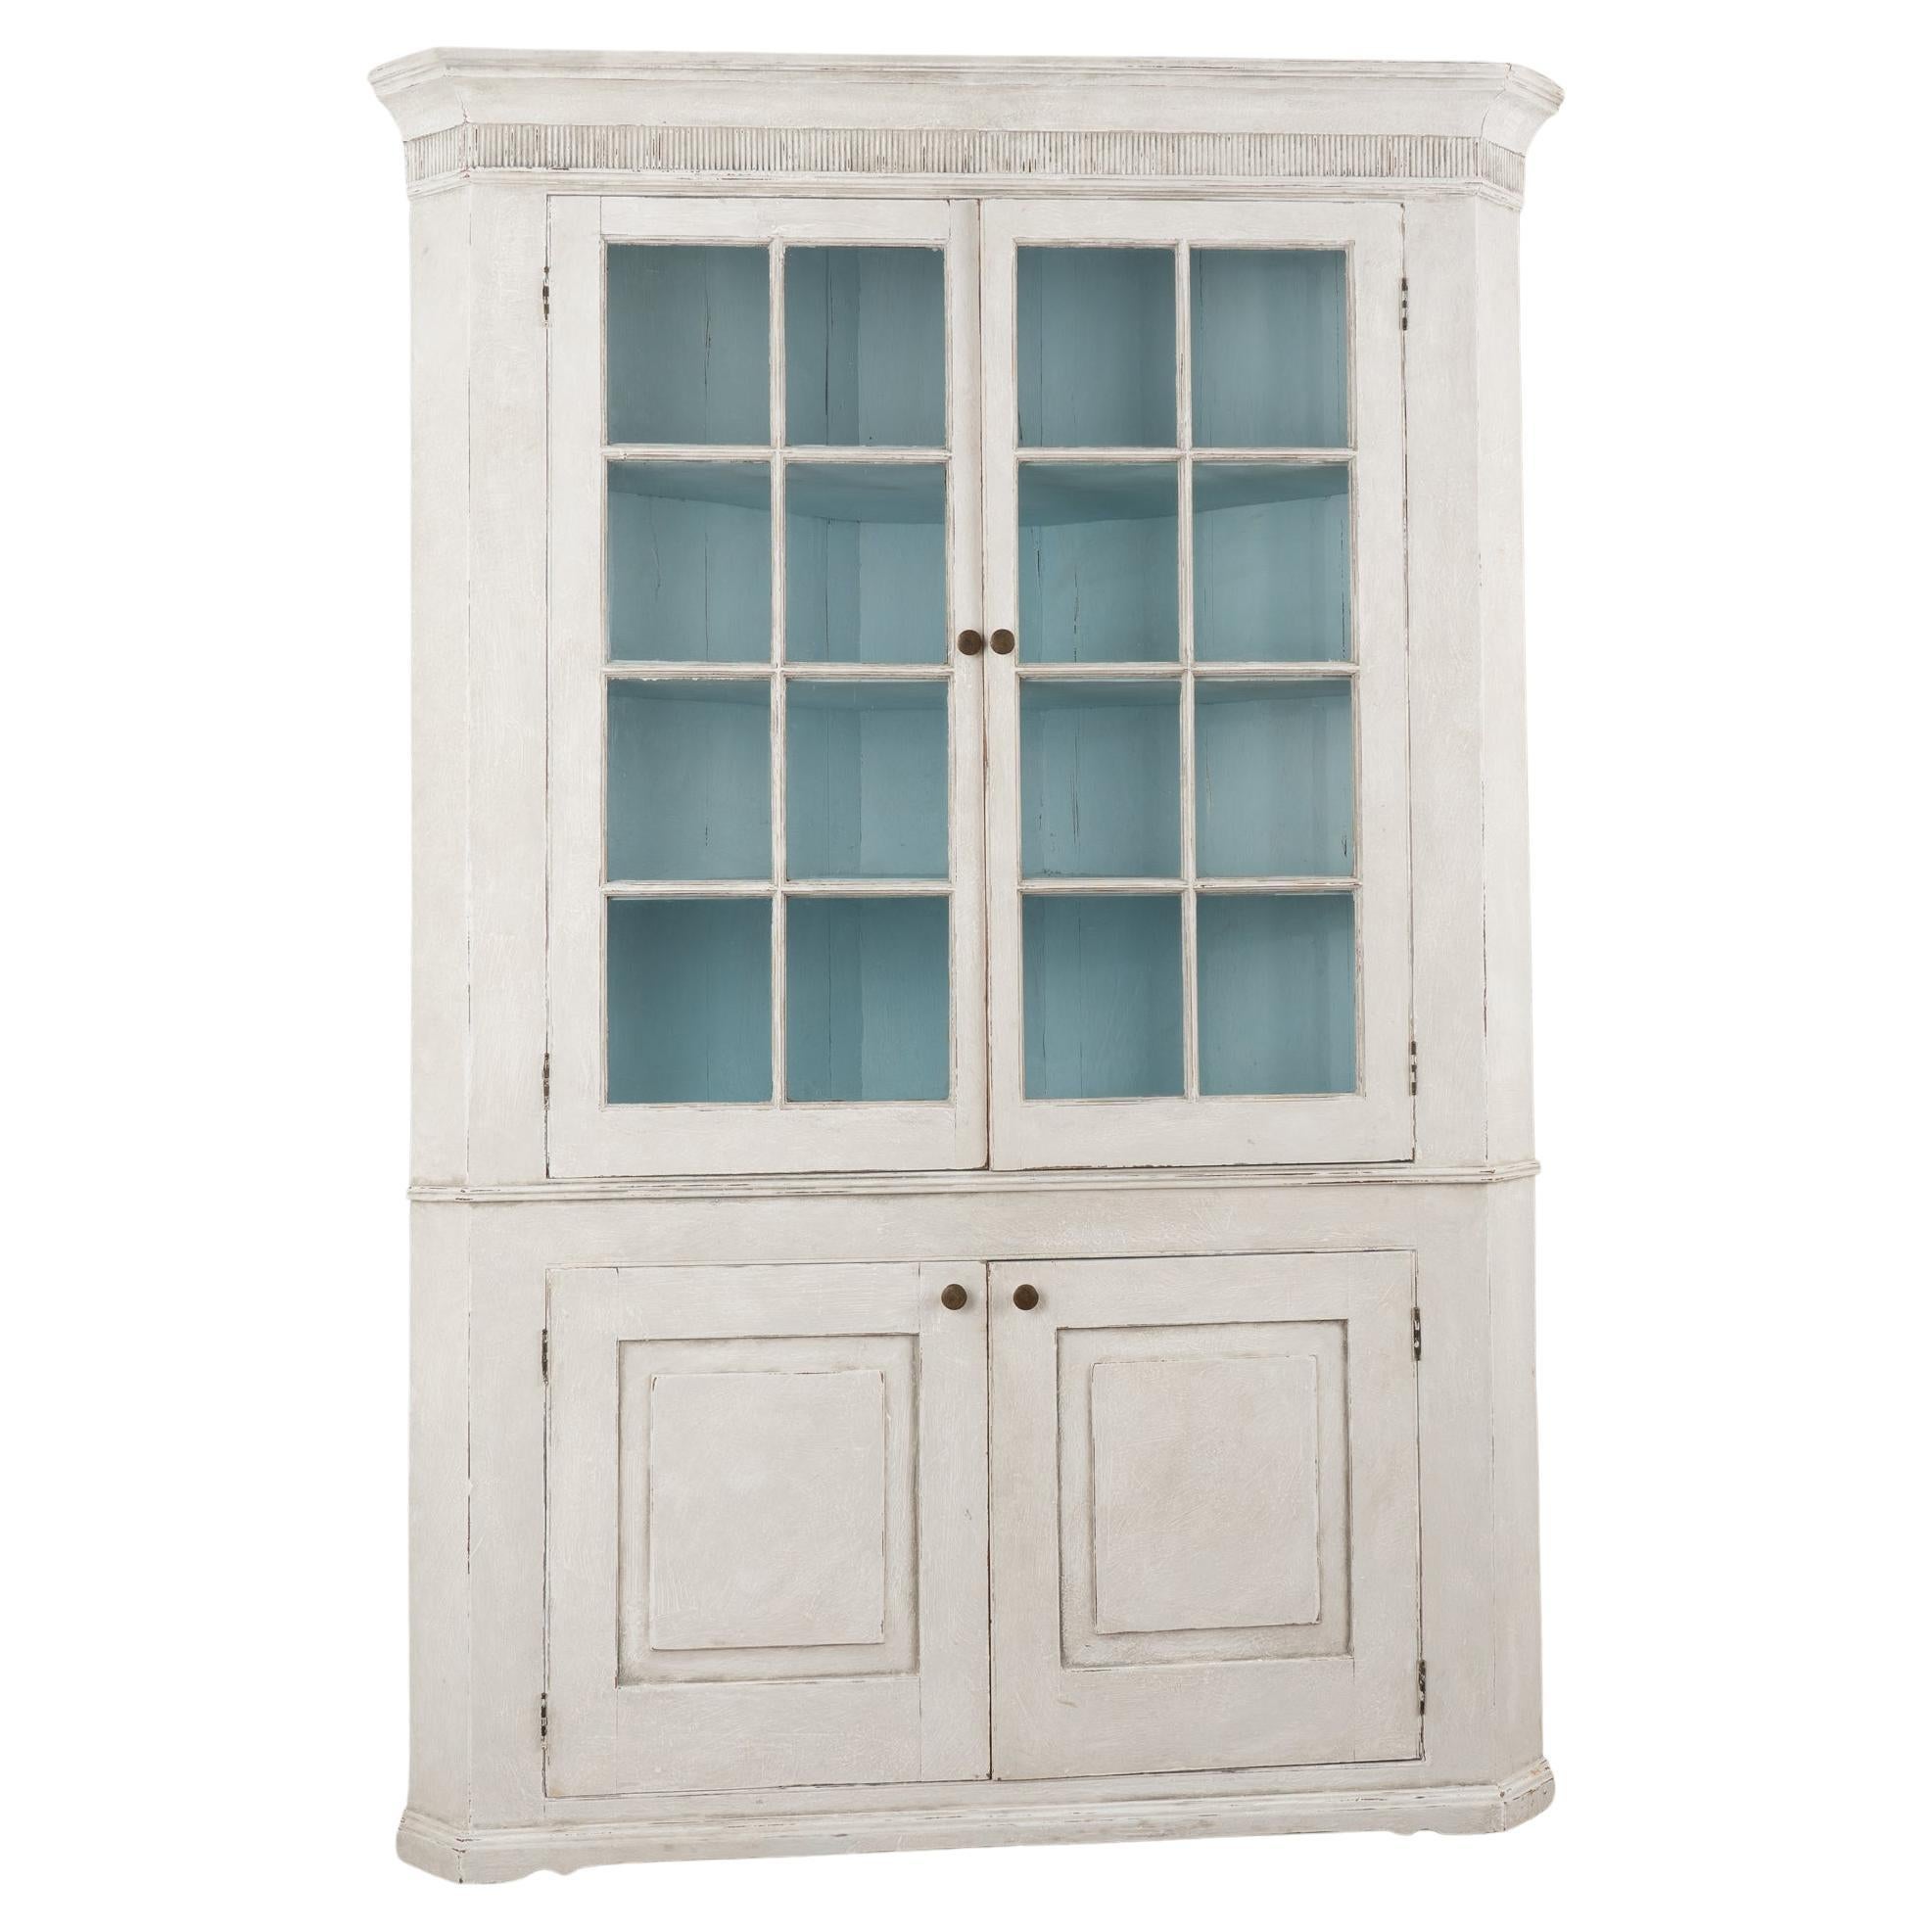 Gray Painted Corner Cabinet With Pane Glass, Sweden circa 1840-60 For Sale